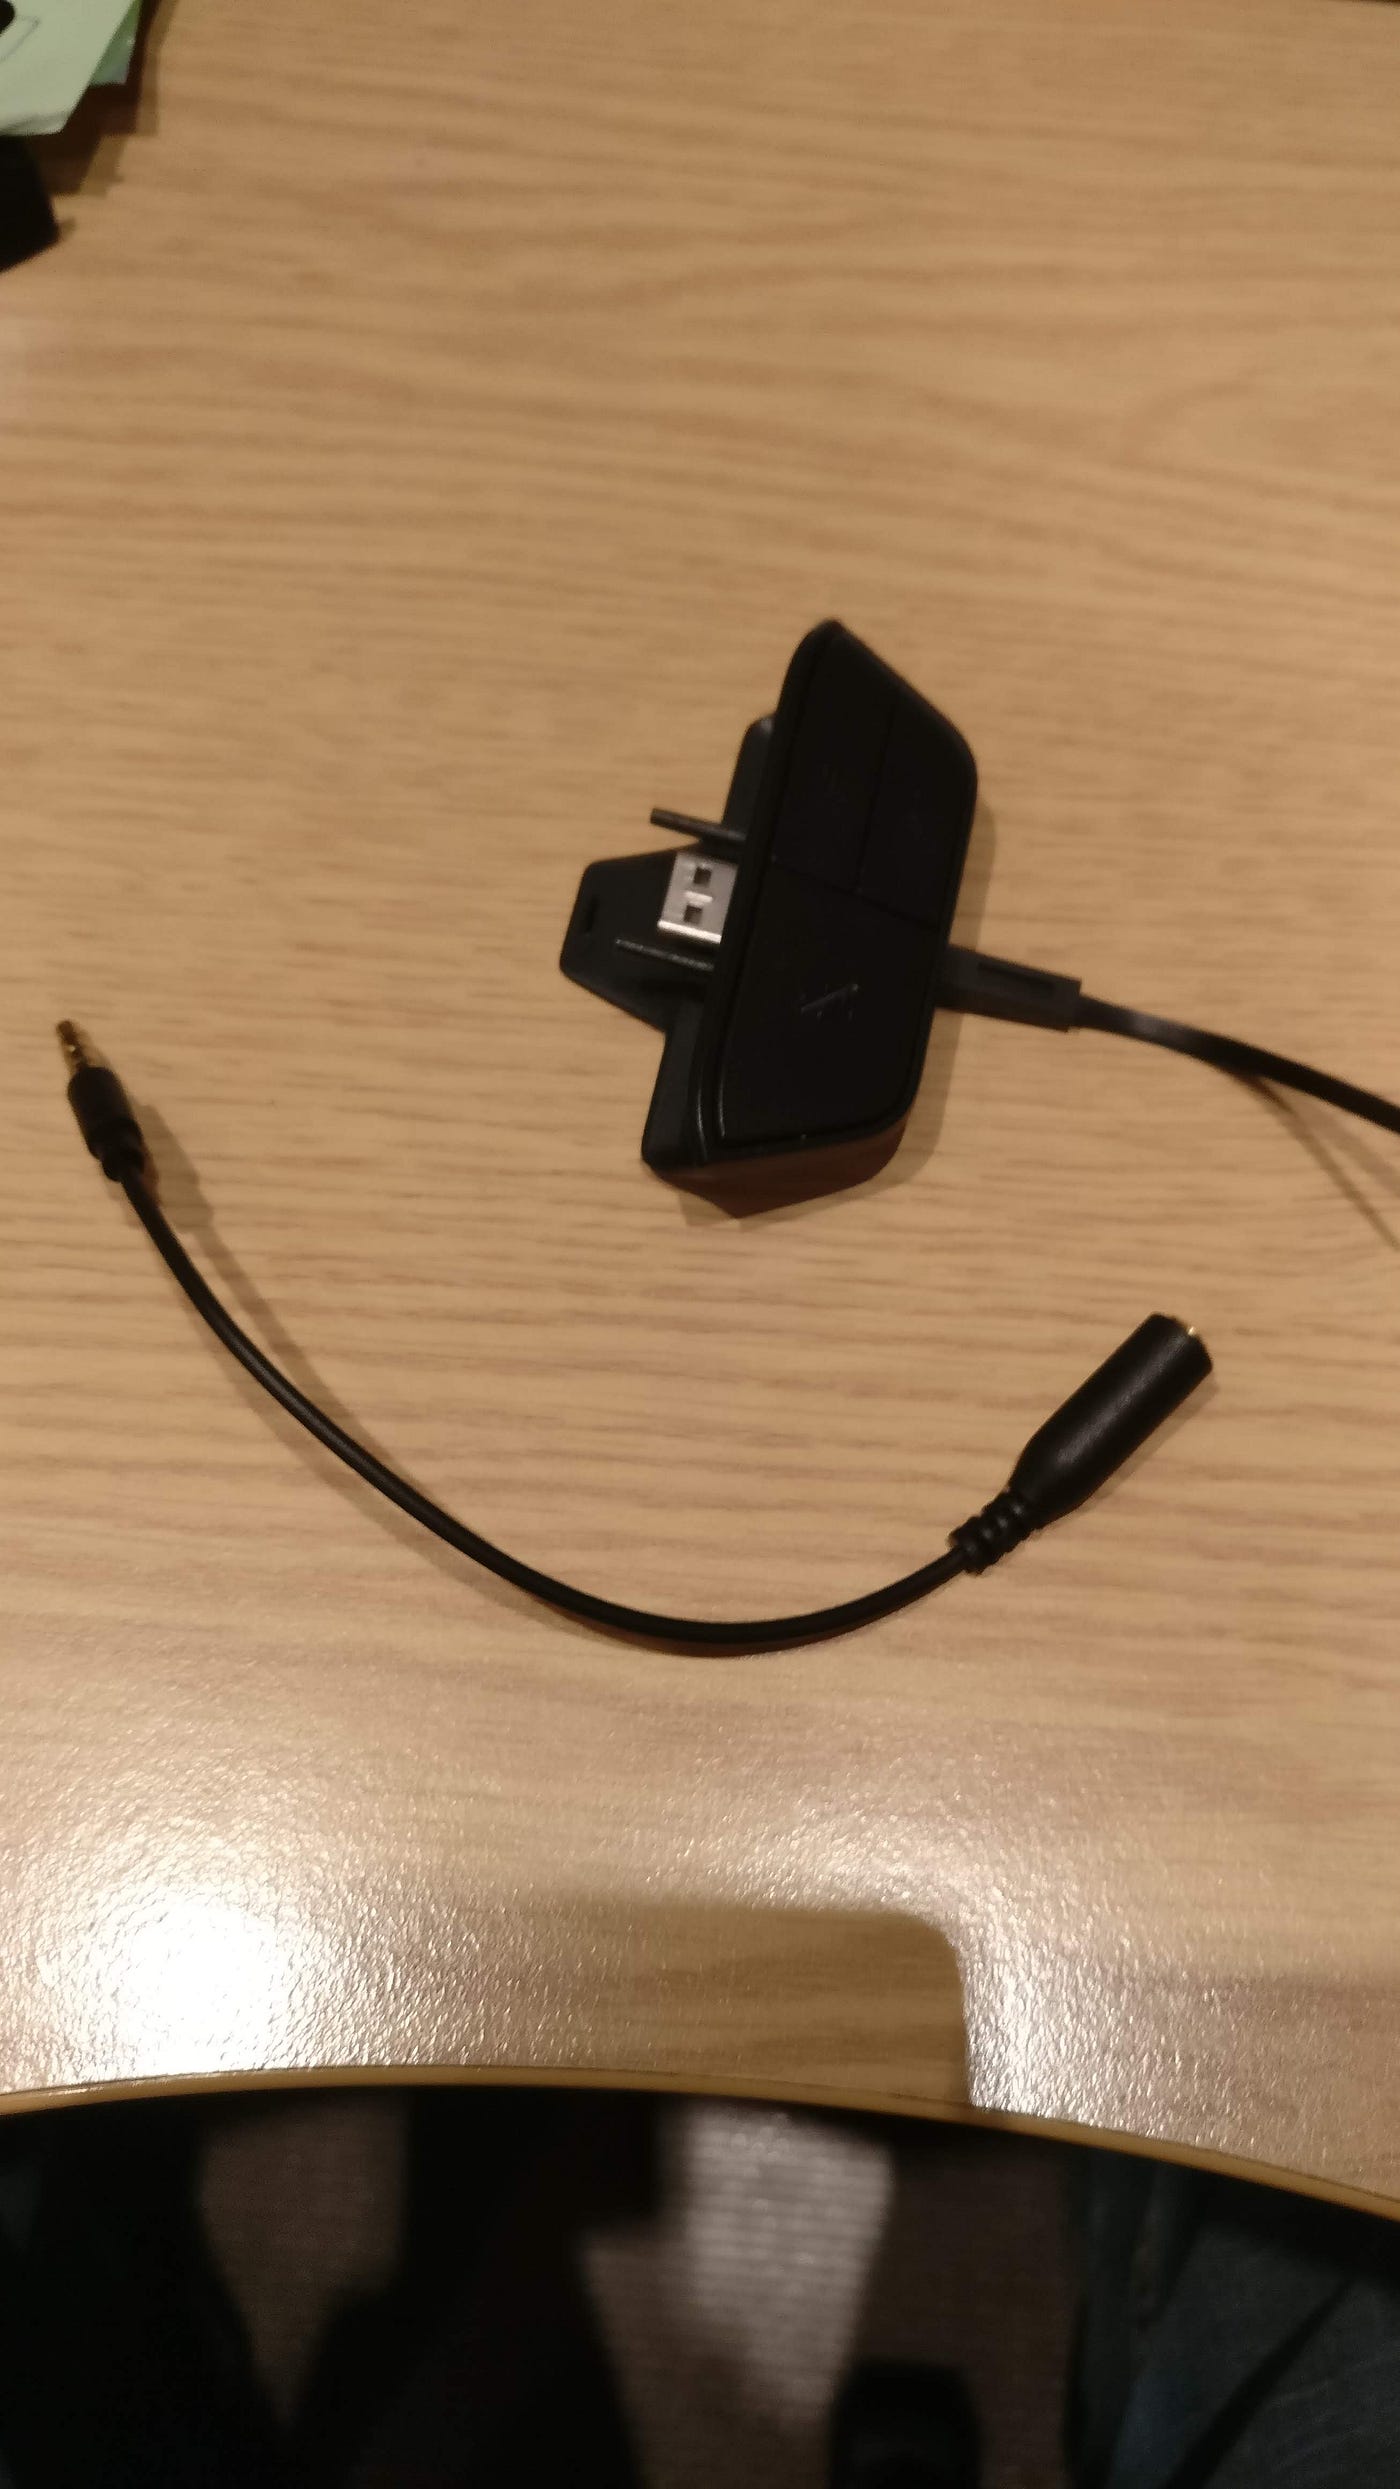 Build your own Xbox headset adaptor for cheap | by MrVectrex | Medium